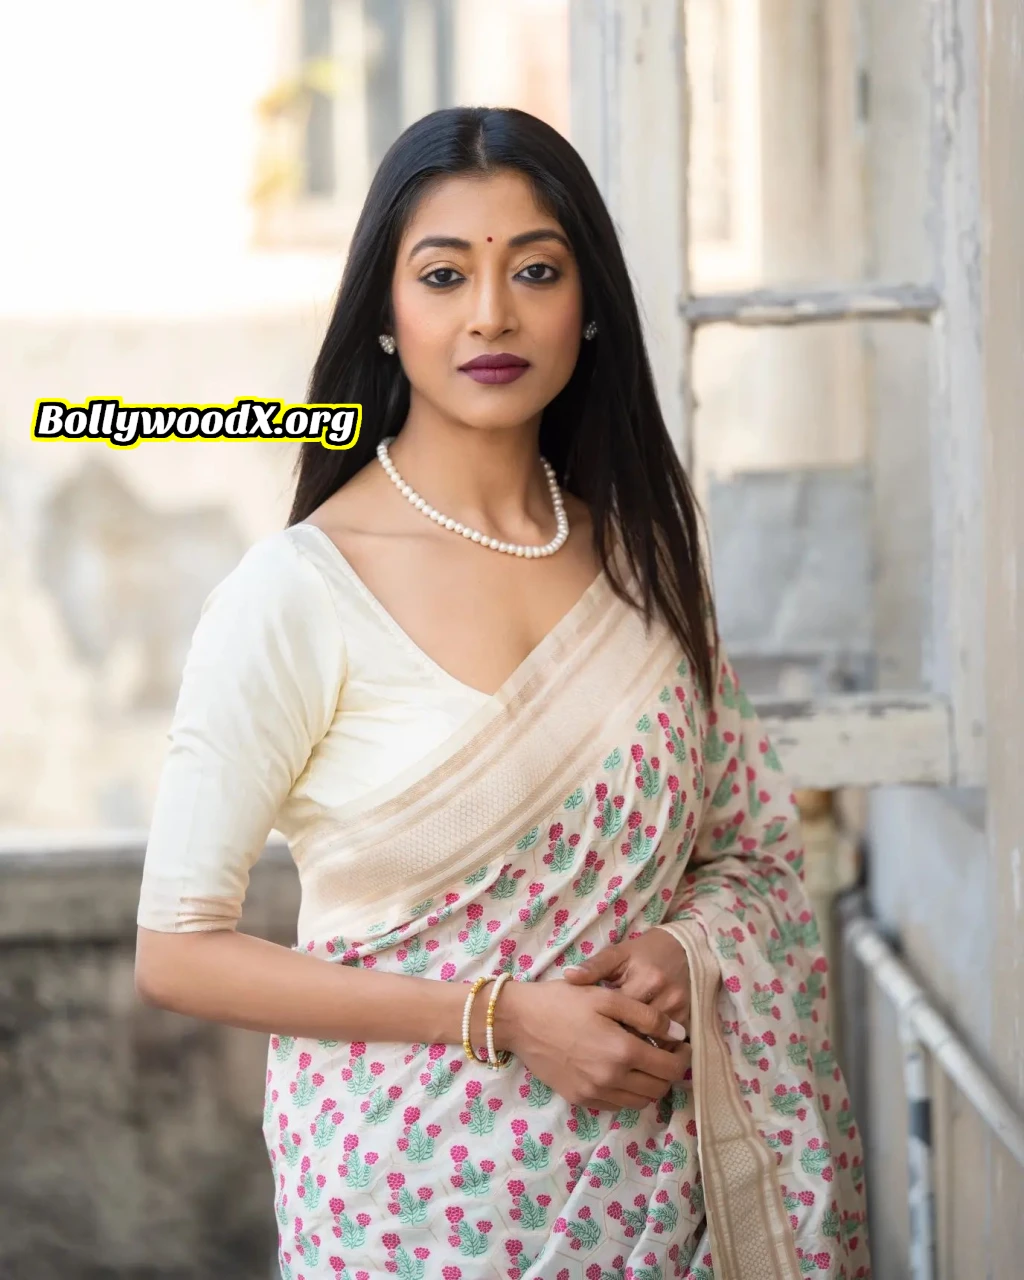 Paoli Dam sexy white Saree blouse removed nude boobs nipple outdoor bold